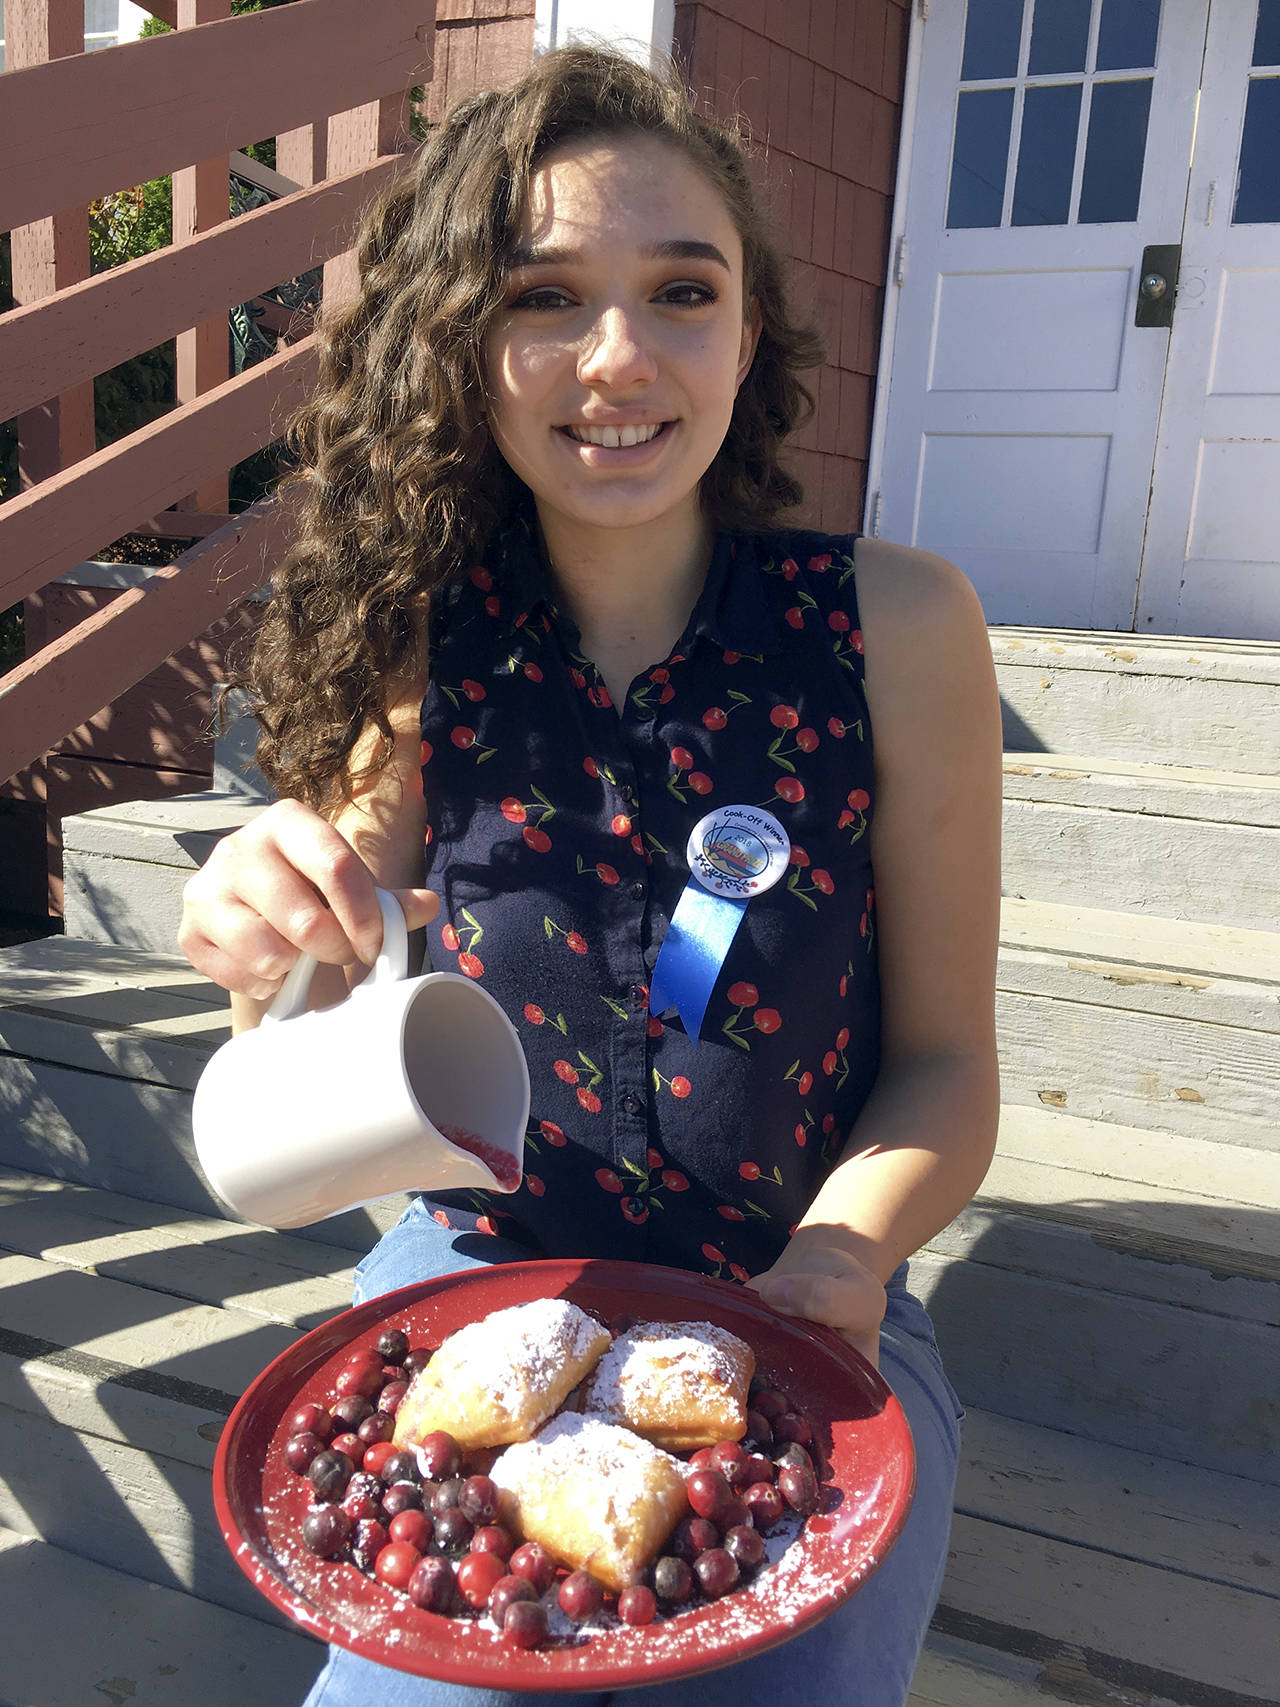 (Photo by Tanya Lana) “Best in Show” for the cranberry cookoff went to 16-year-old Kiana Morrow of North Cove, for her cranberry beignets with hot cranberry-honey glaze.